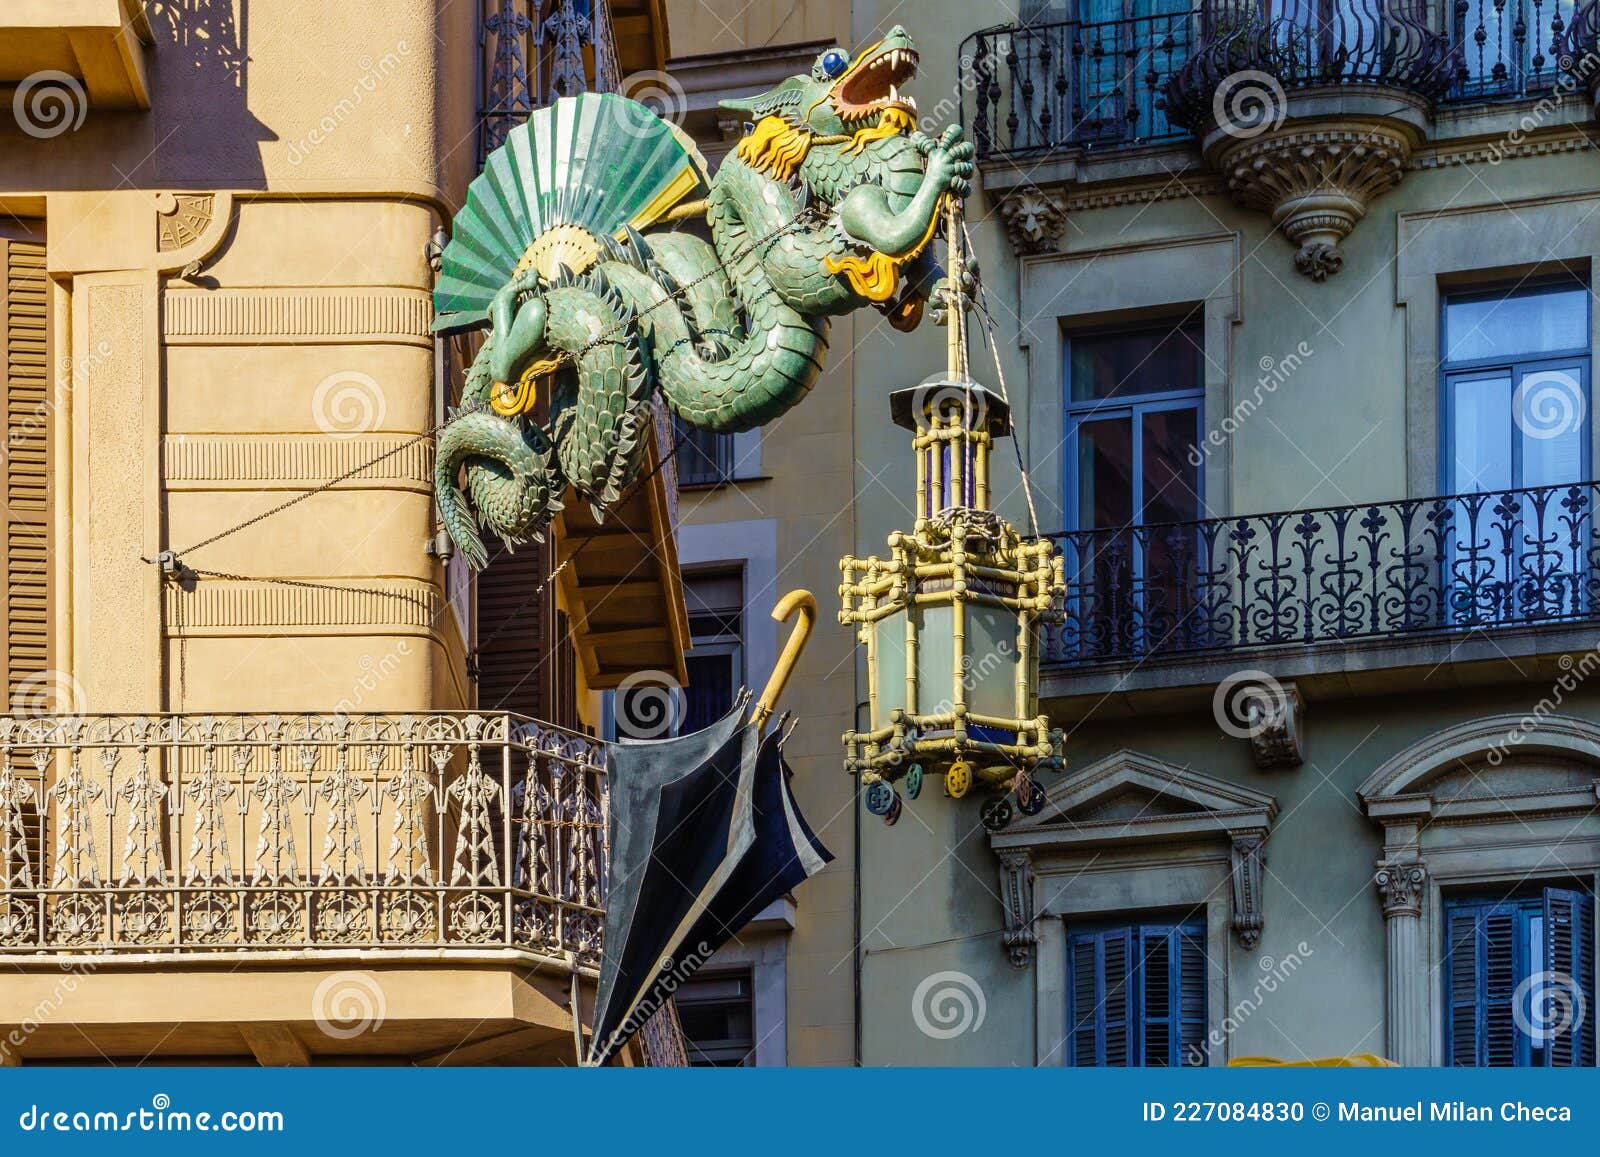 chinese dragon in the casa bruno cuadros, house of umbrellas a house built by josep vilaseca and an old umbrella shop, an example